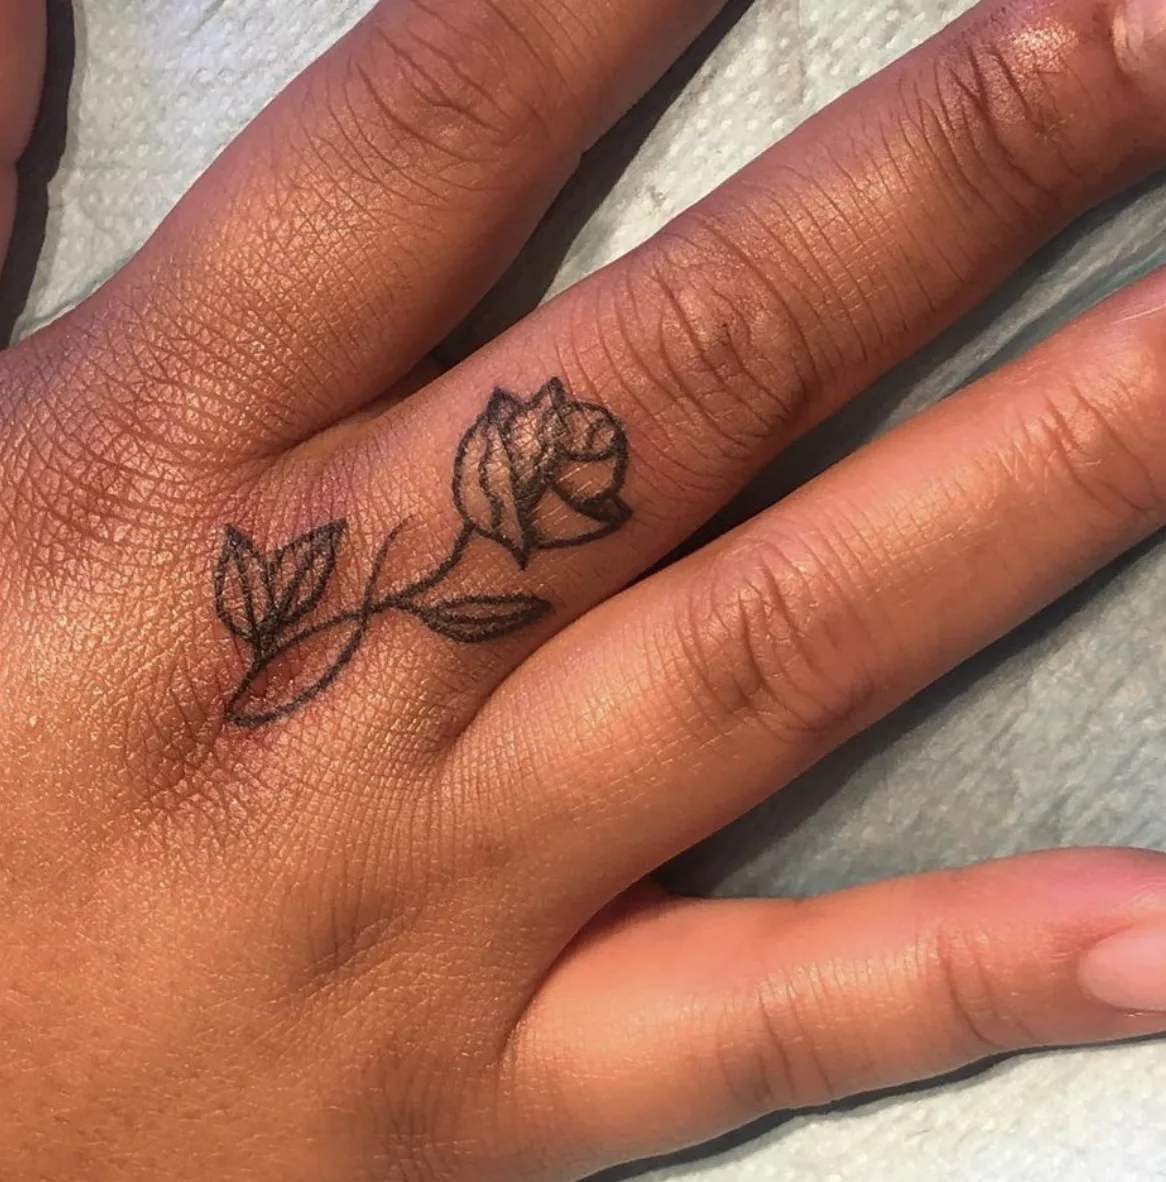 Finger Cover Up Tattoo Rose  Best Tattoo Ideas Gallery